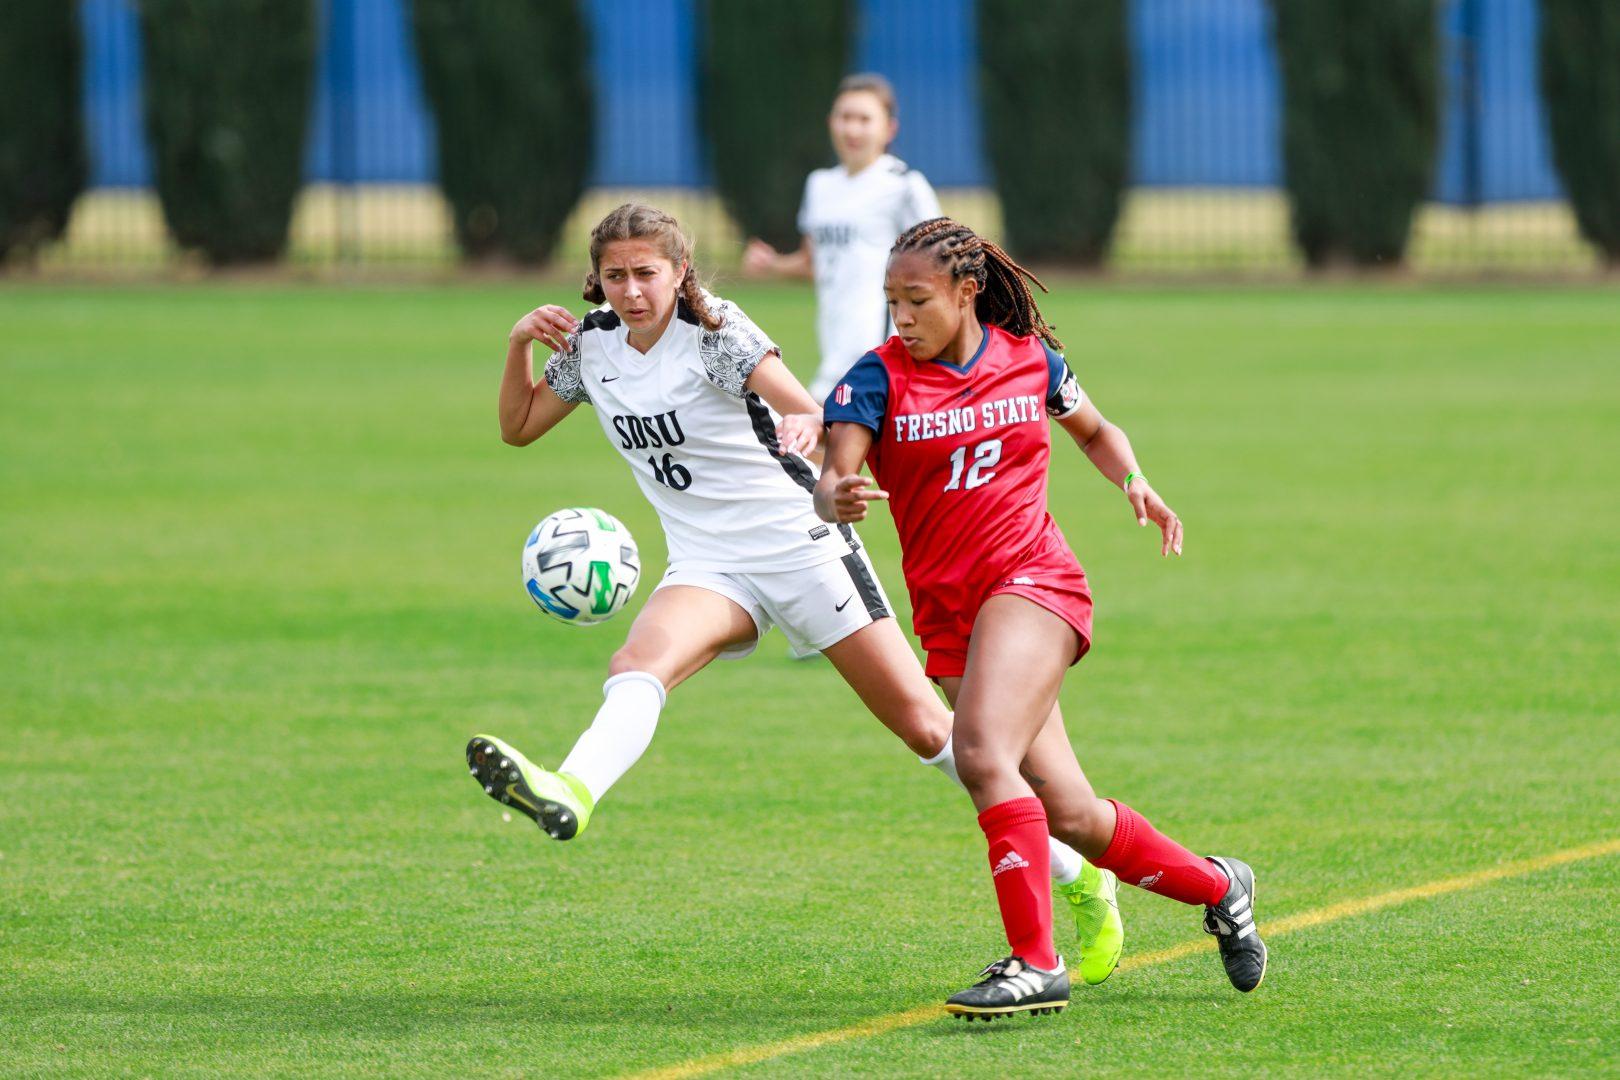 Fresno State forward Ele Avery is up against SDSU midfielder Kiera Utush during the first half at Soccer and Lacrosse Stadium on Sunday, March 14, 2021. (Vendila Yang/The Collegian)